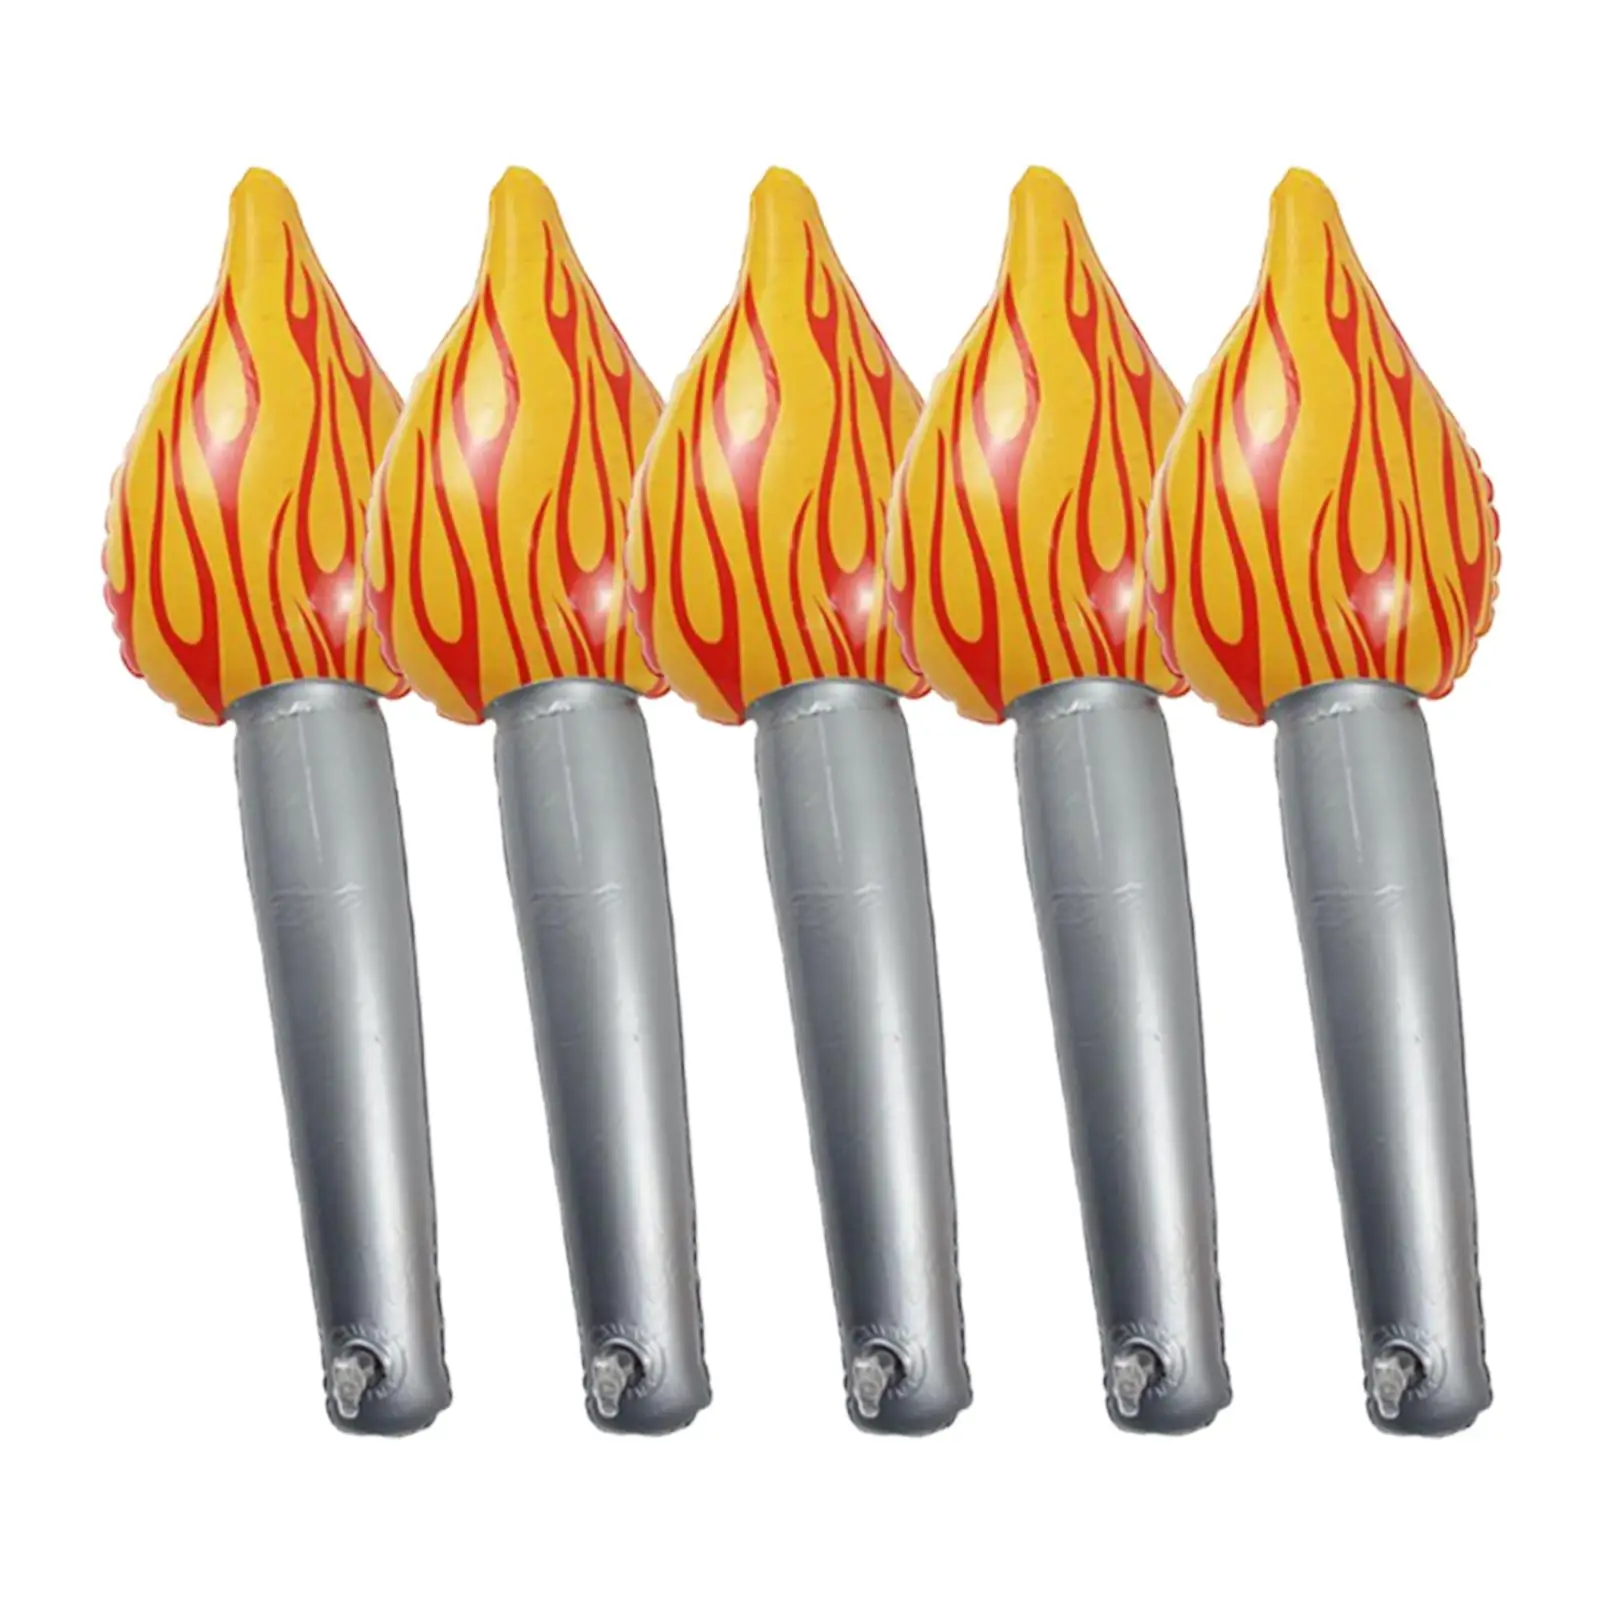 5 Pieces Inflatable Flame fun Torch Balloon for Sports Carnival Decor